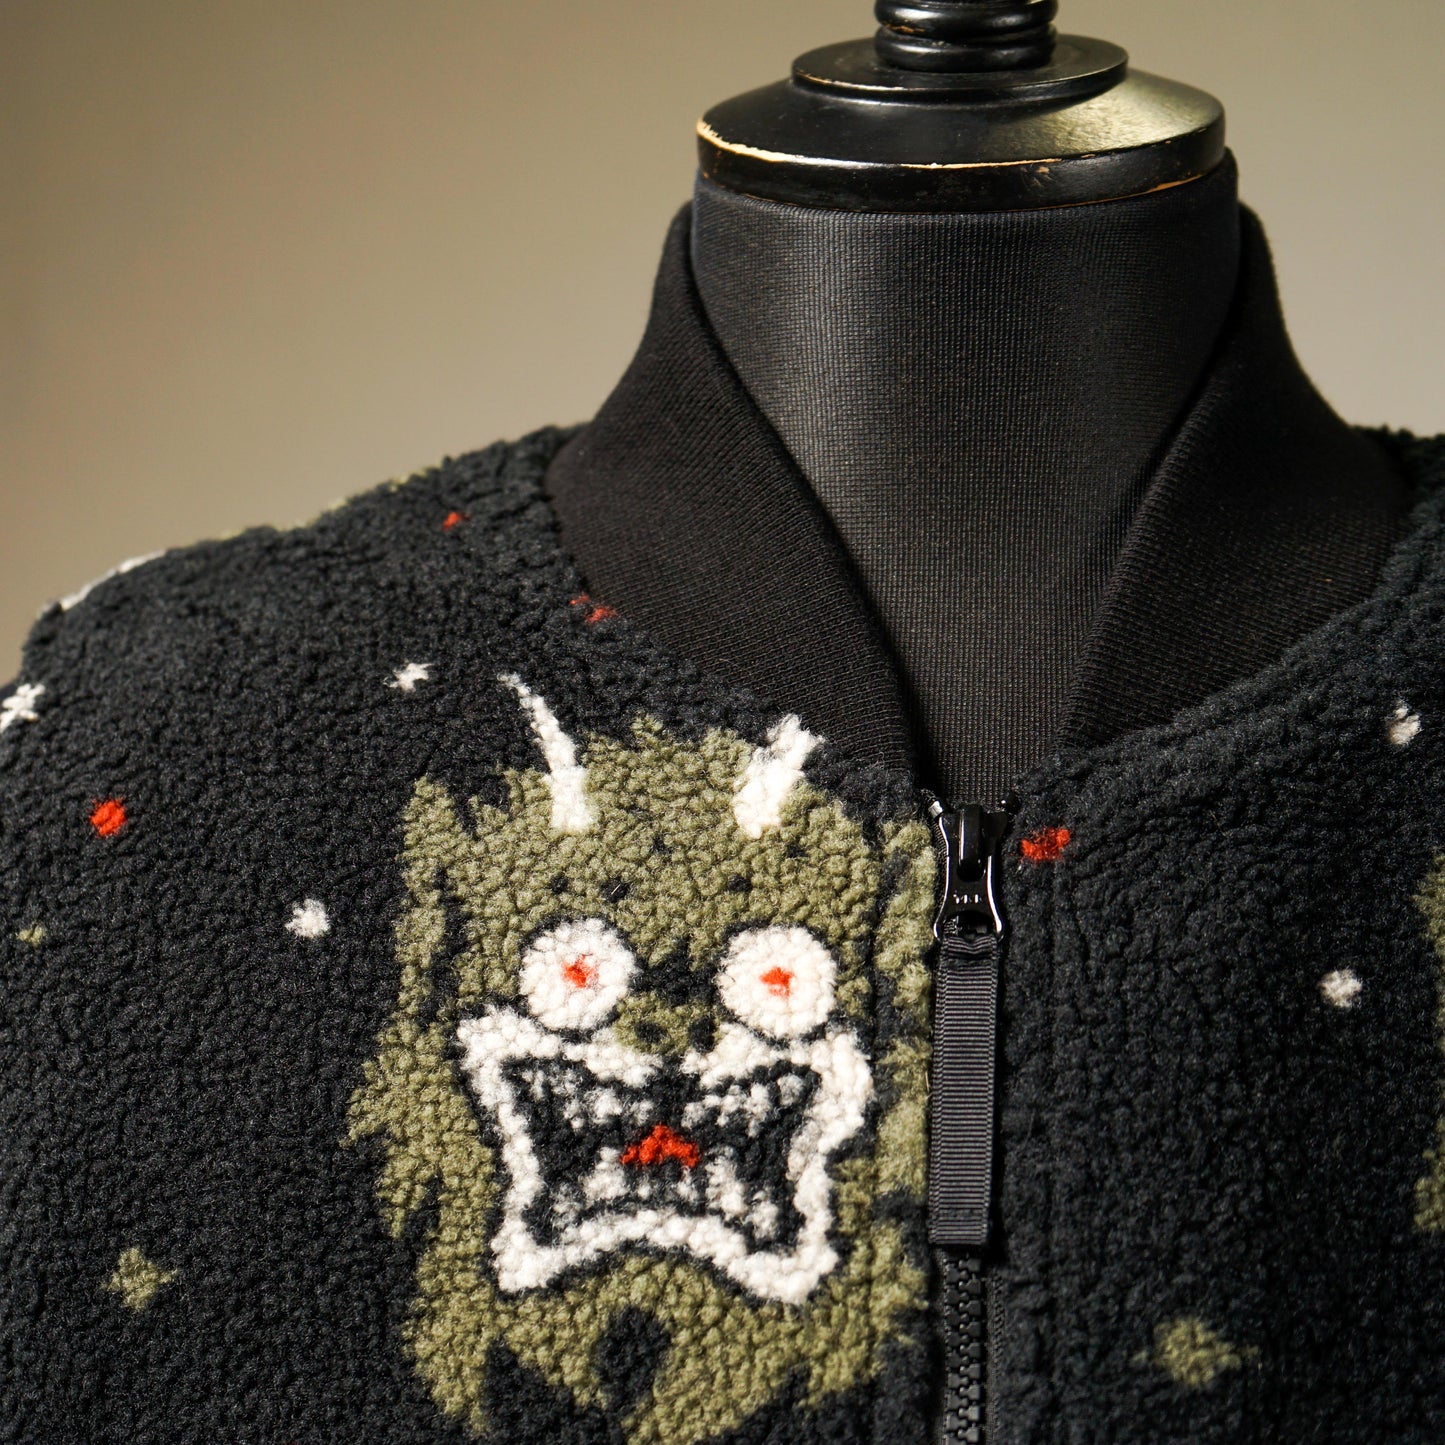 GREAT MOON MONSTER - VEST / WRD-22-AW-08